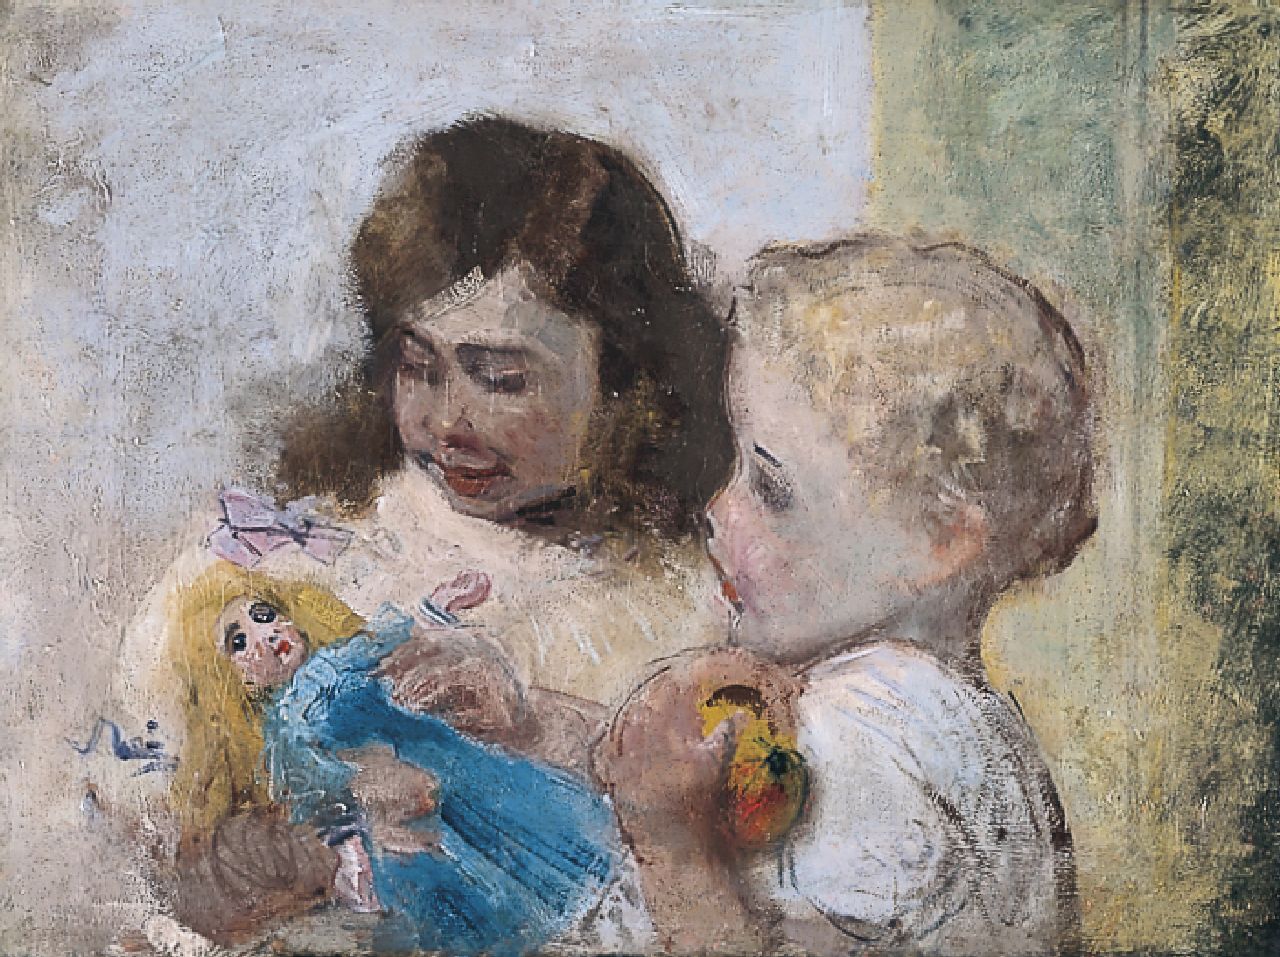 Rink P.Ph.  | Paulus Philippus 'Paul' Rink, Children with a doll, oil on canvas 49.5 x 65.0 cm, signed on the reverse